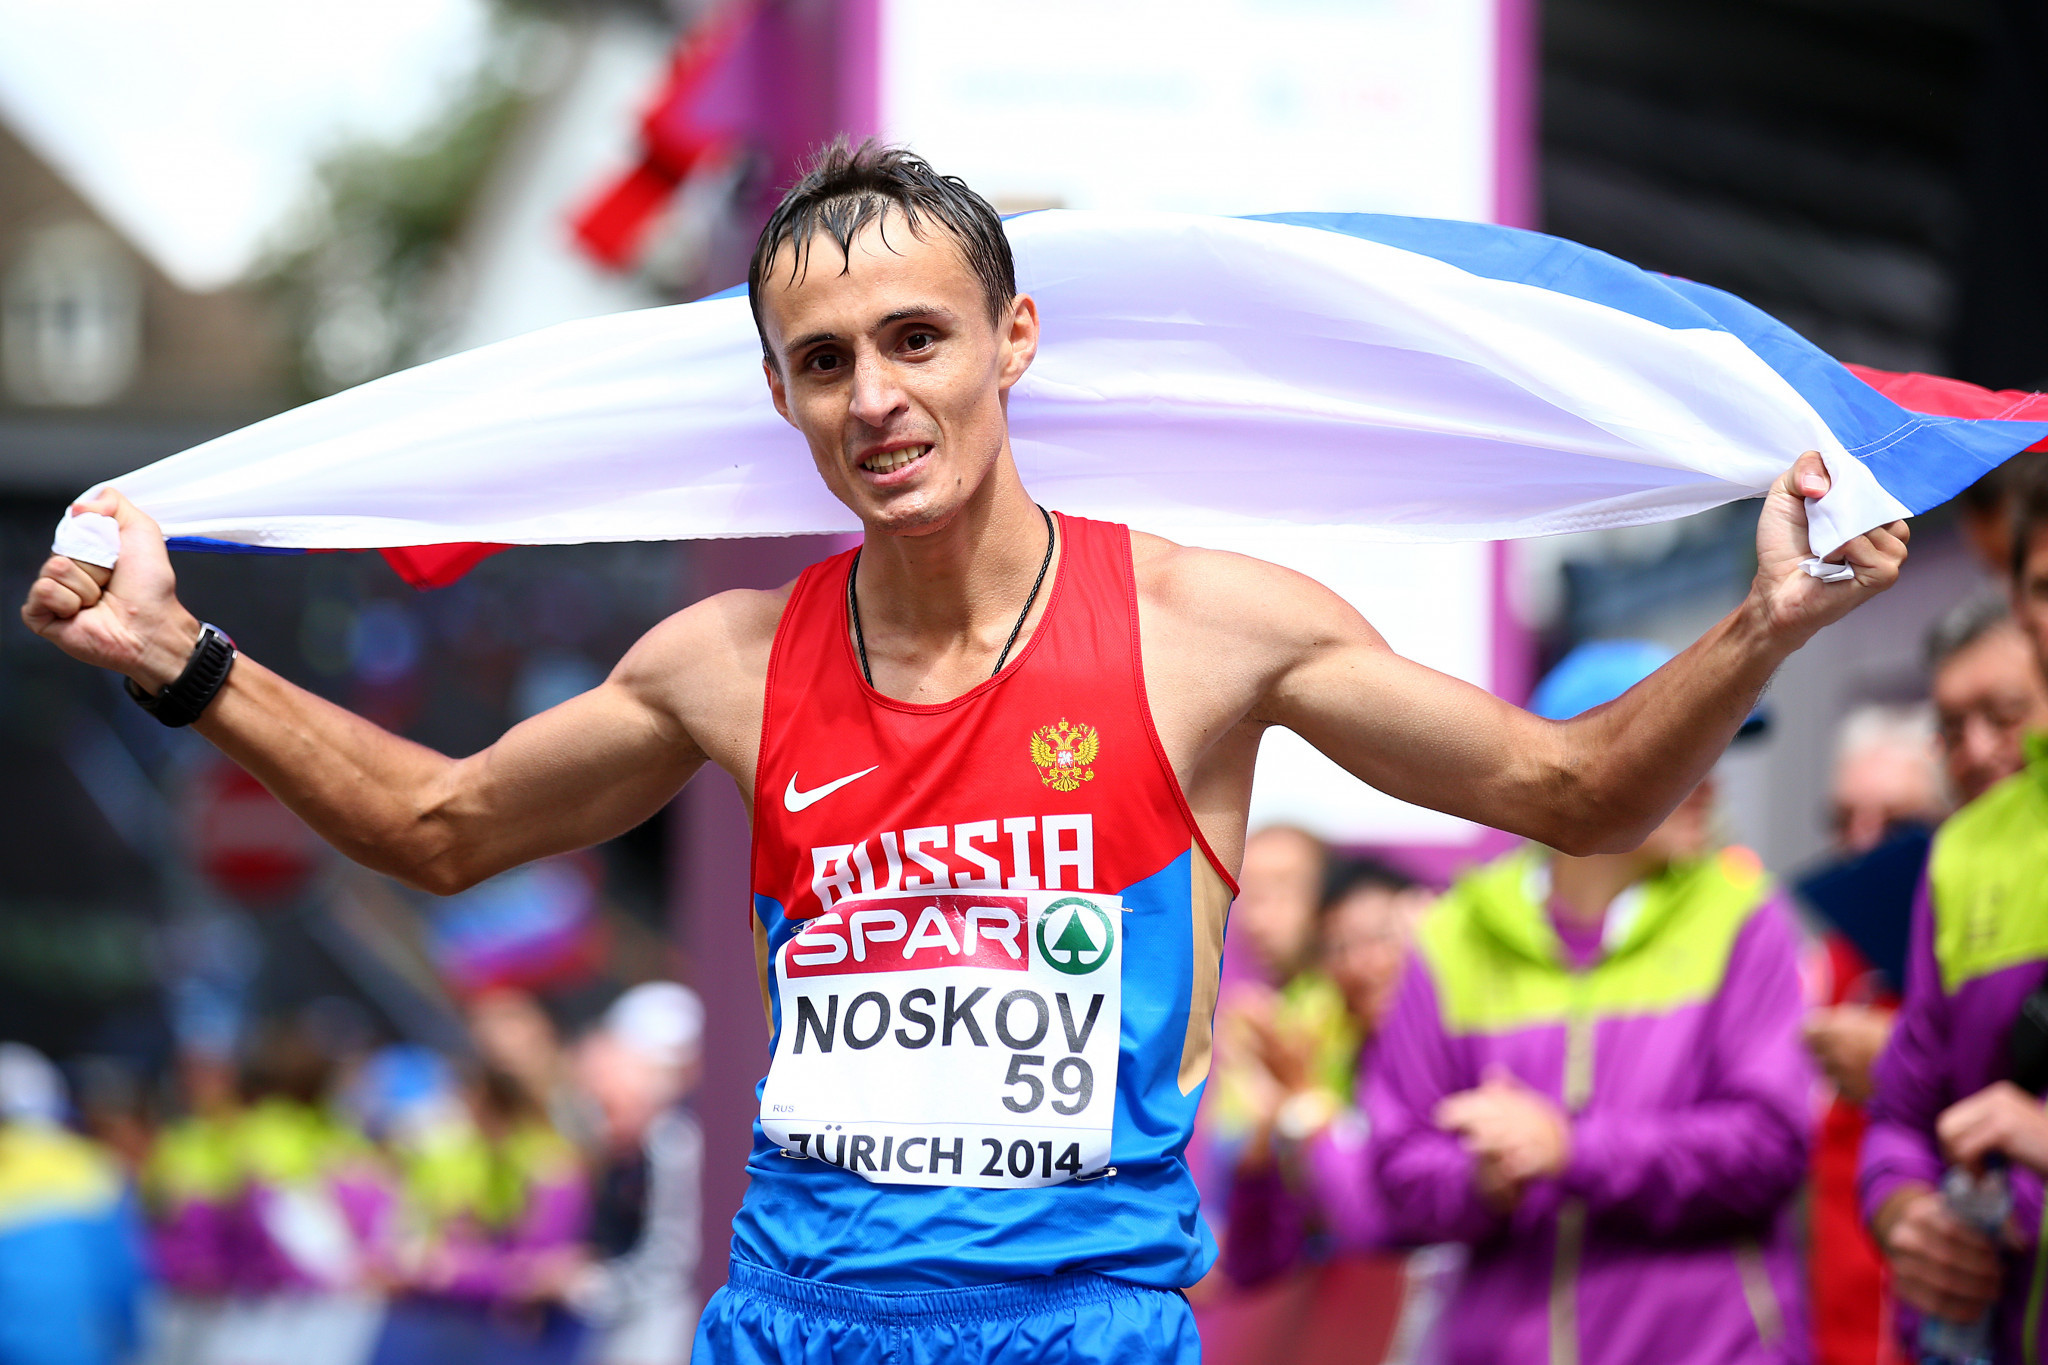 Russia's Ivan Noskov has had results from 2015 scrapped following a re-test of a doping sample which showed traces of EPO ©Getty Images